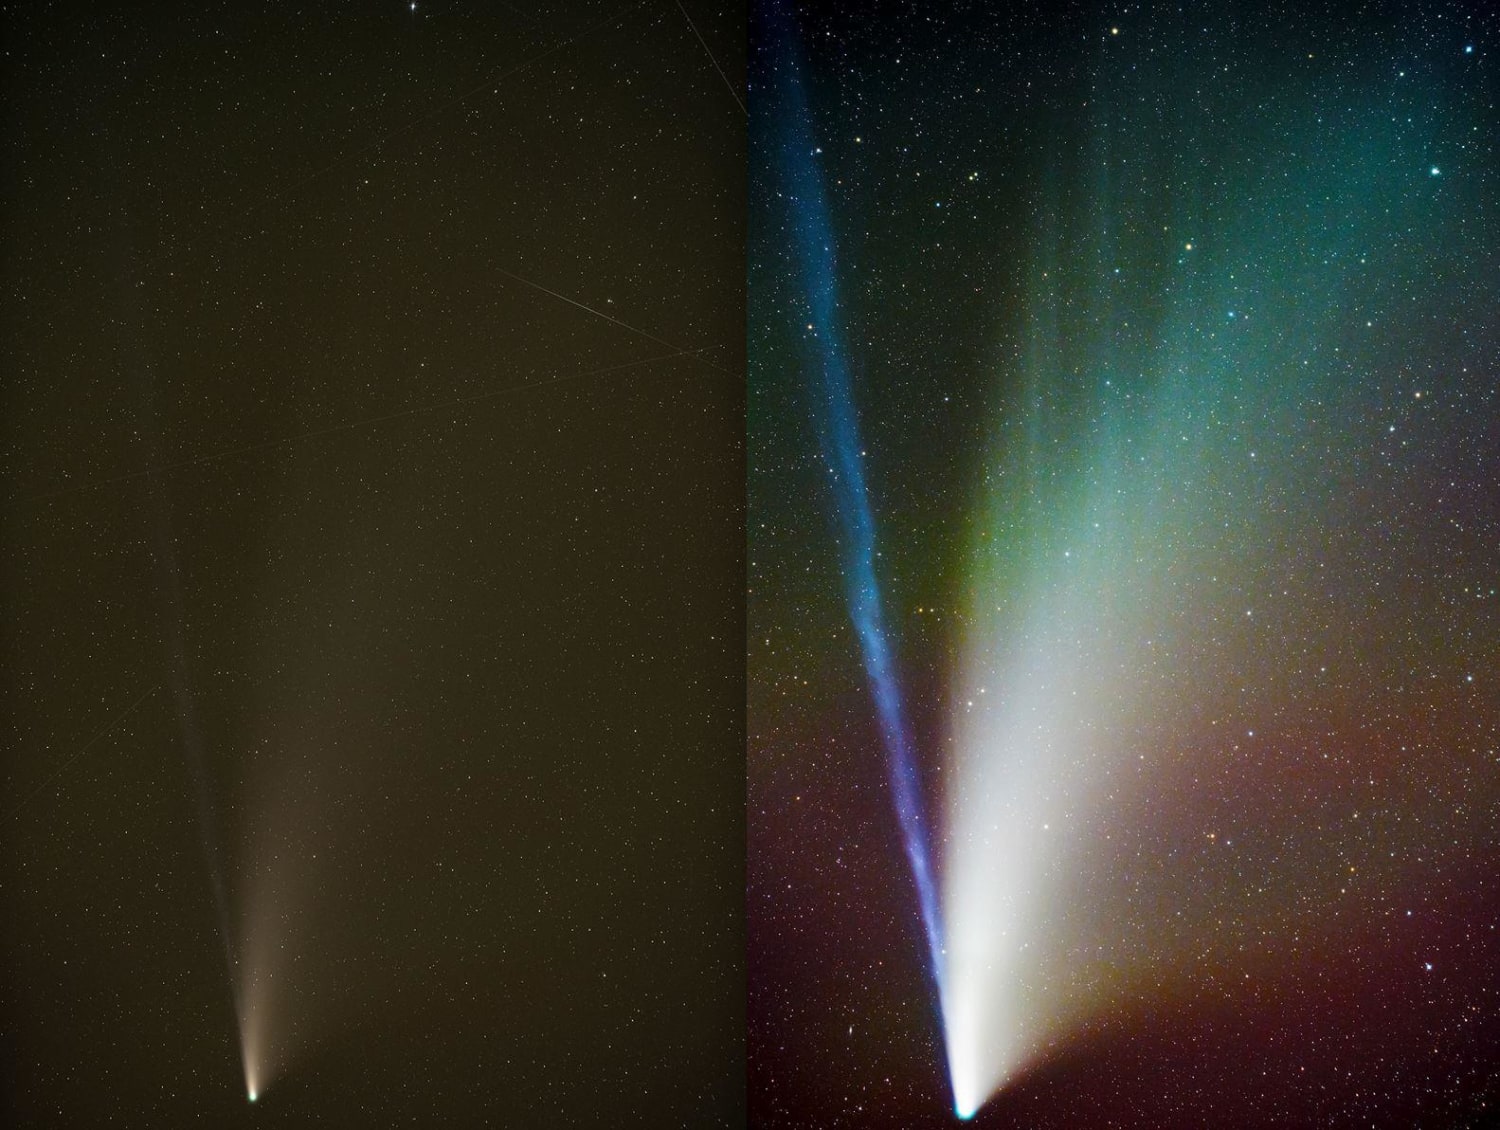 Comet NEOWISE before and after editing with a link for the editing tutorial